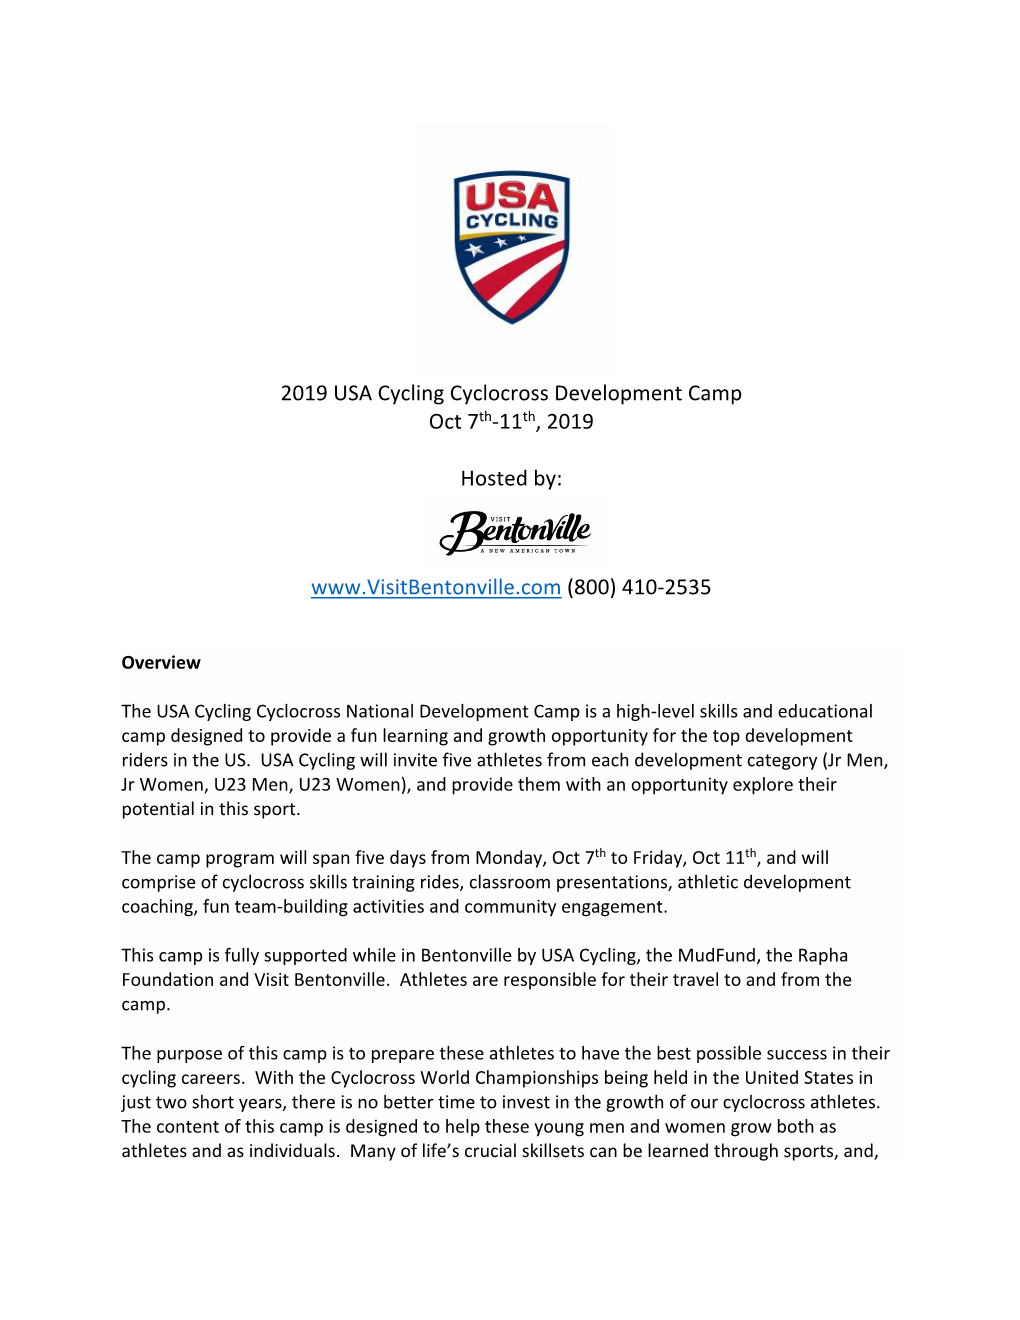 2019 USA Cycling Cyclocross Development Camp Oct 7Th-11Th, 2019 Hosted By: (800) 410-2535